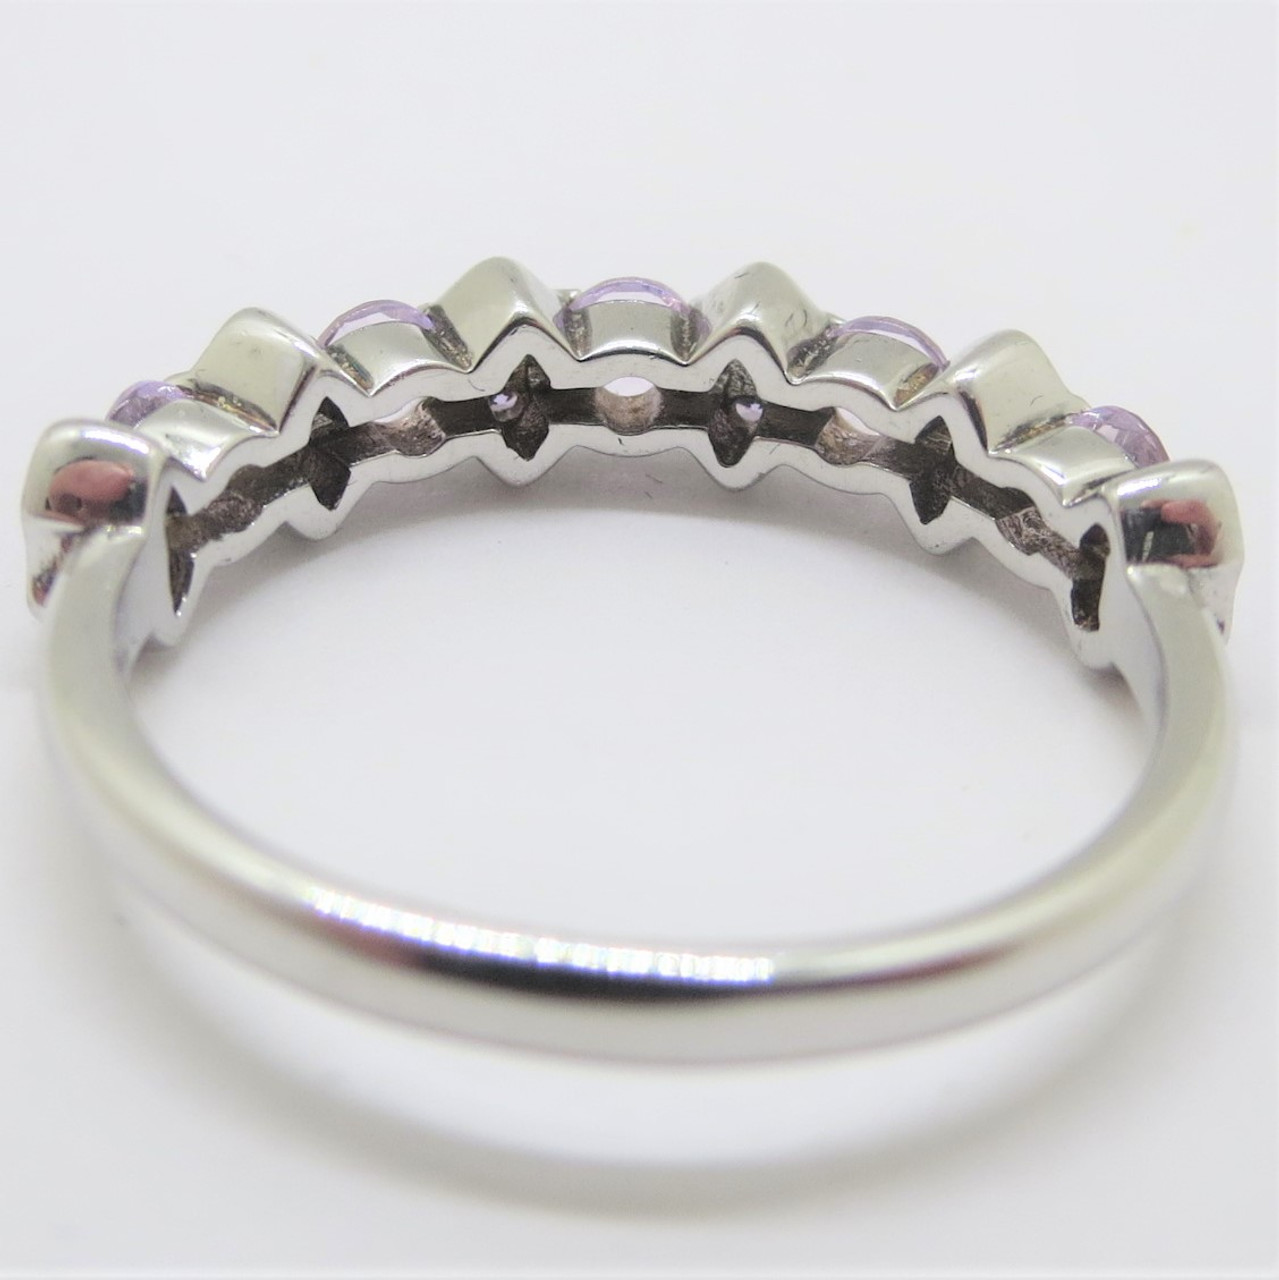 Bomb Party - Our Sterling Club rings are true works of art, dazzling in  solid .925 sterling with an array of beautiful stones and designs  handcrafted in brand new styles each and